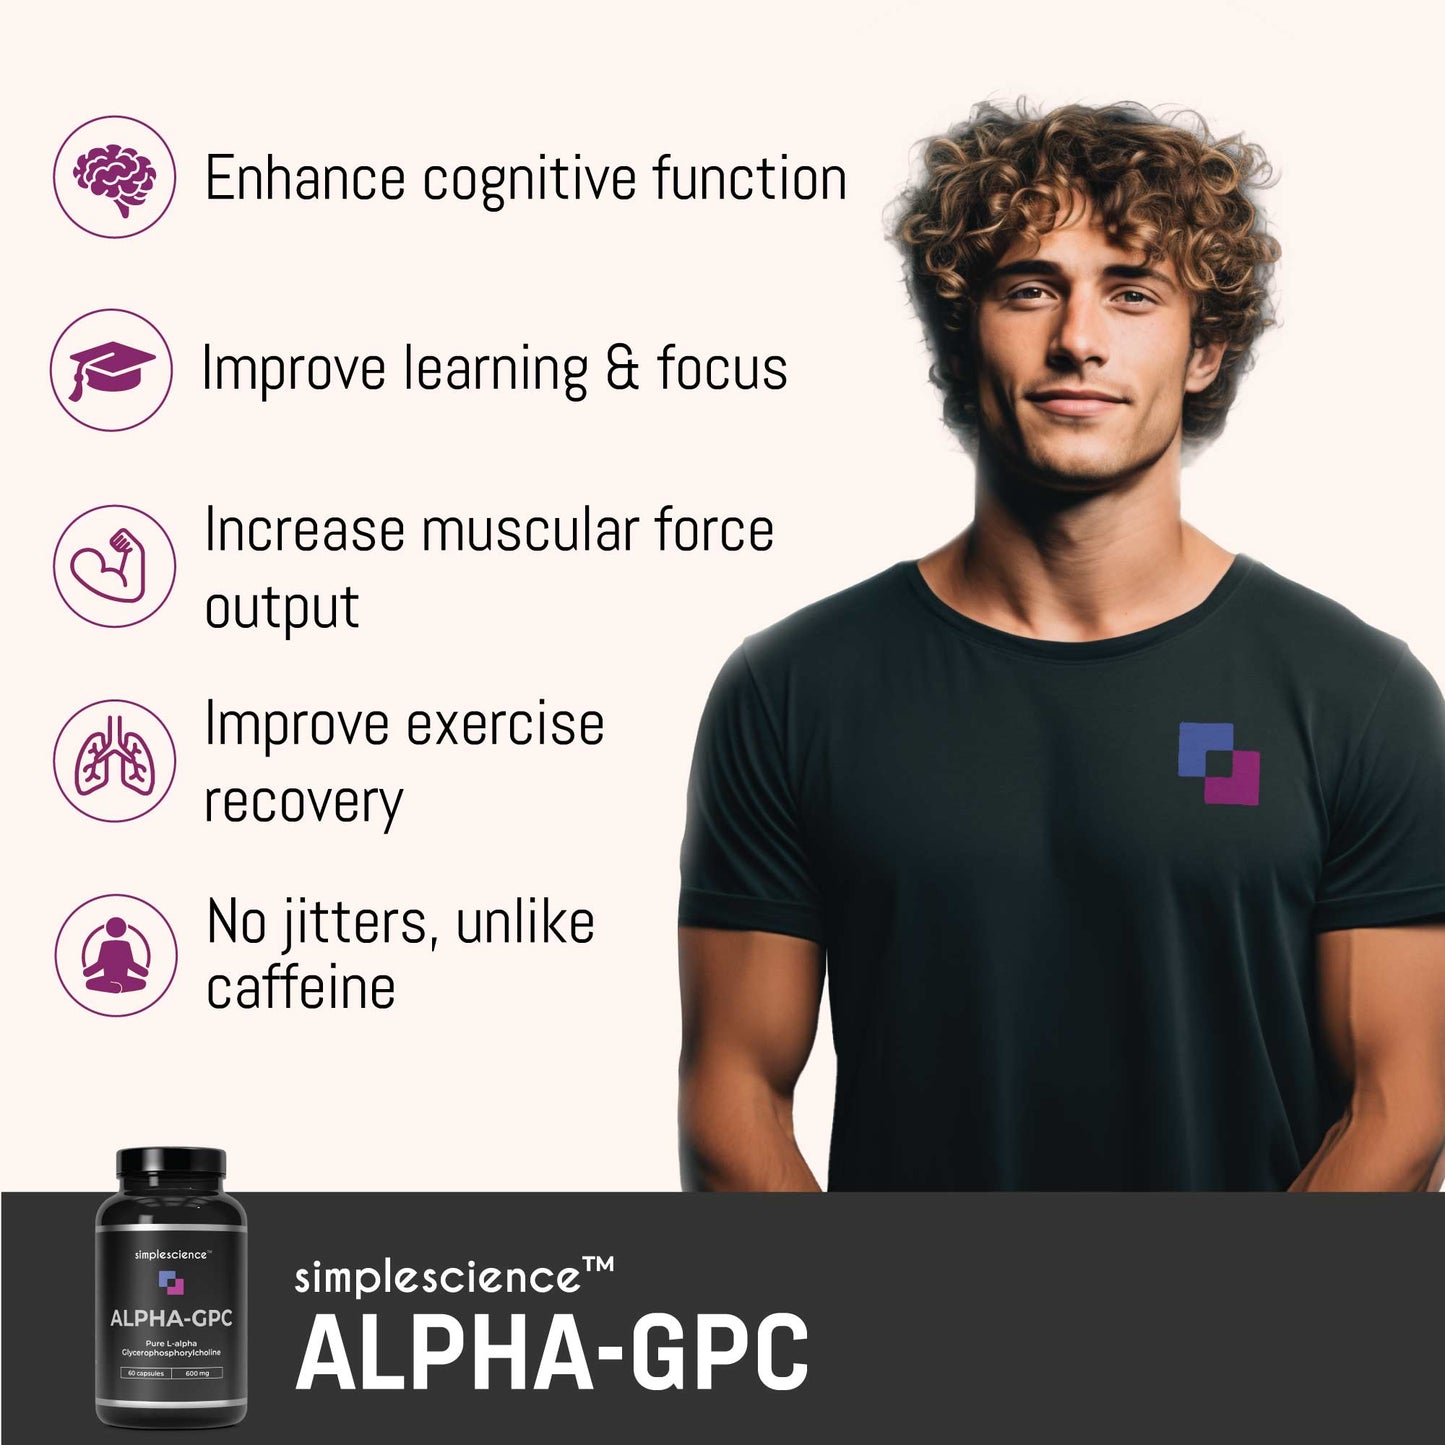 Pure Alpha-GPC 600mg bottle supplement lab tested choline nootropic for brain support, focus, memory, mood and energy, best supplement exercise recovery muscle force learning